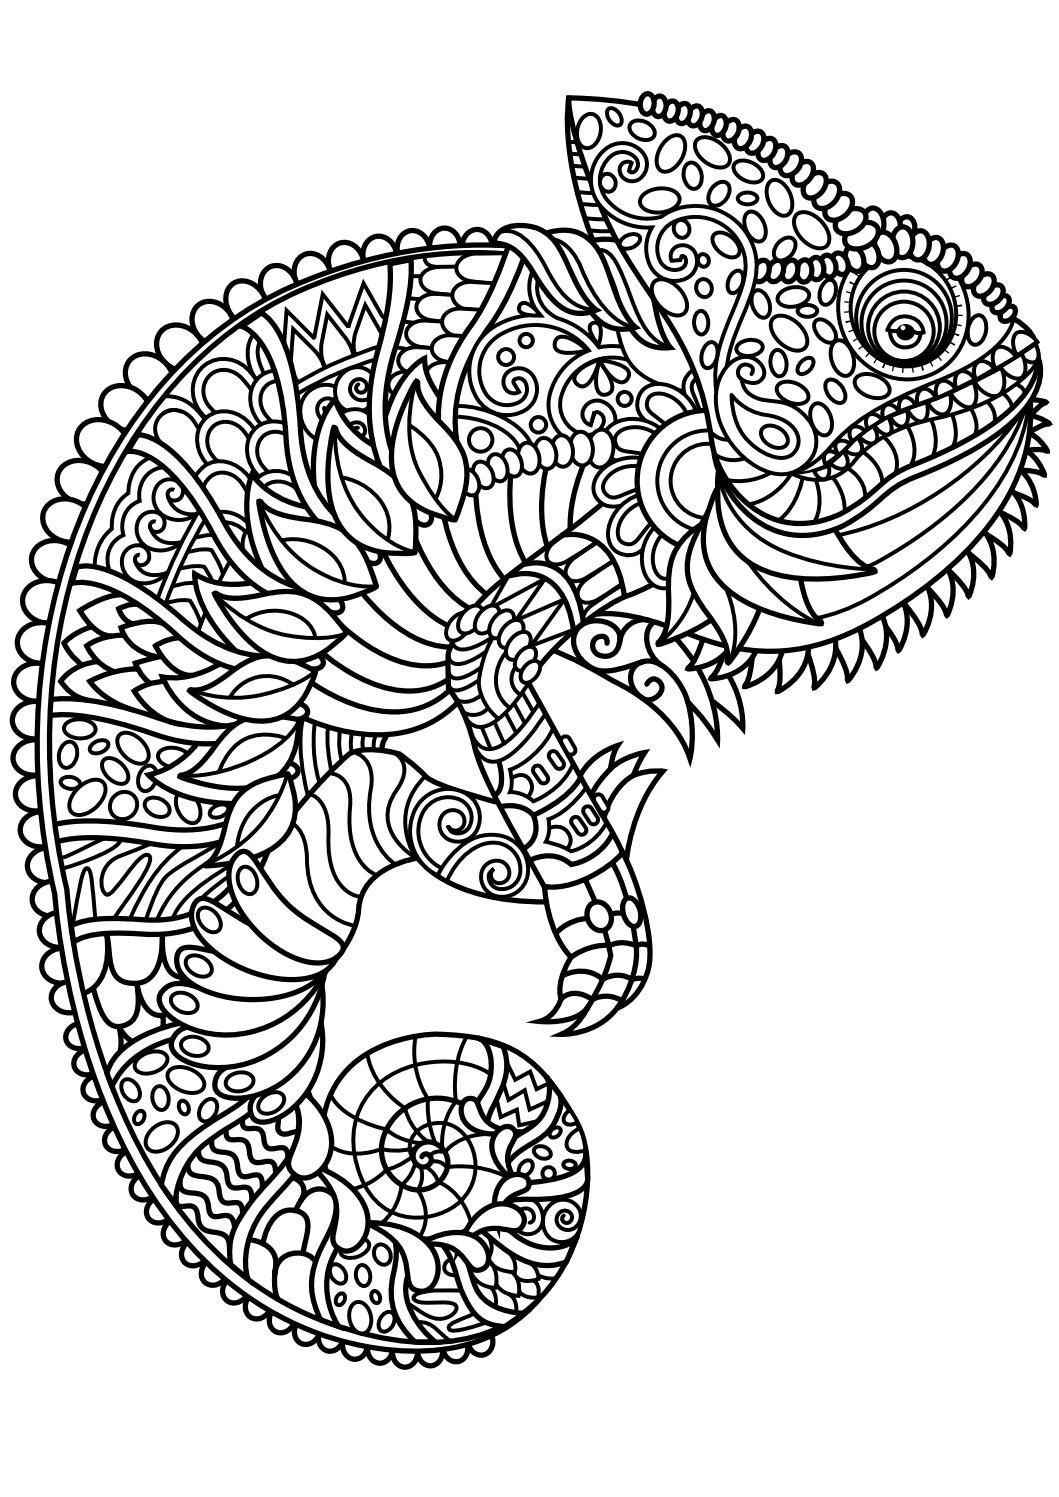 Animals Coloring Pages For Adults
 Animal coloring pages pdf Coloring Animals